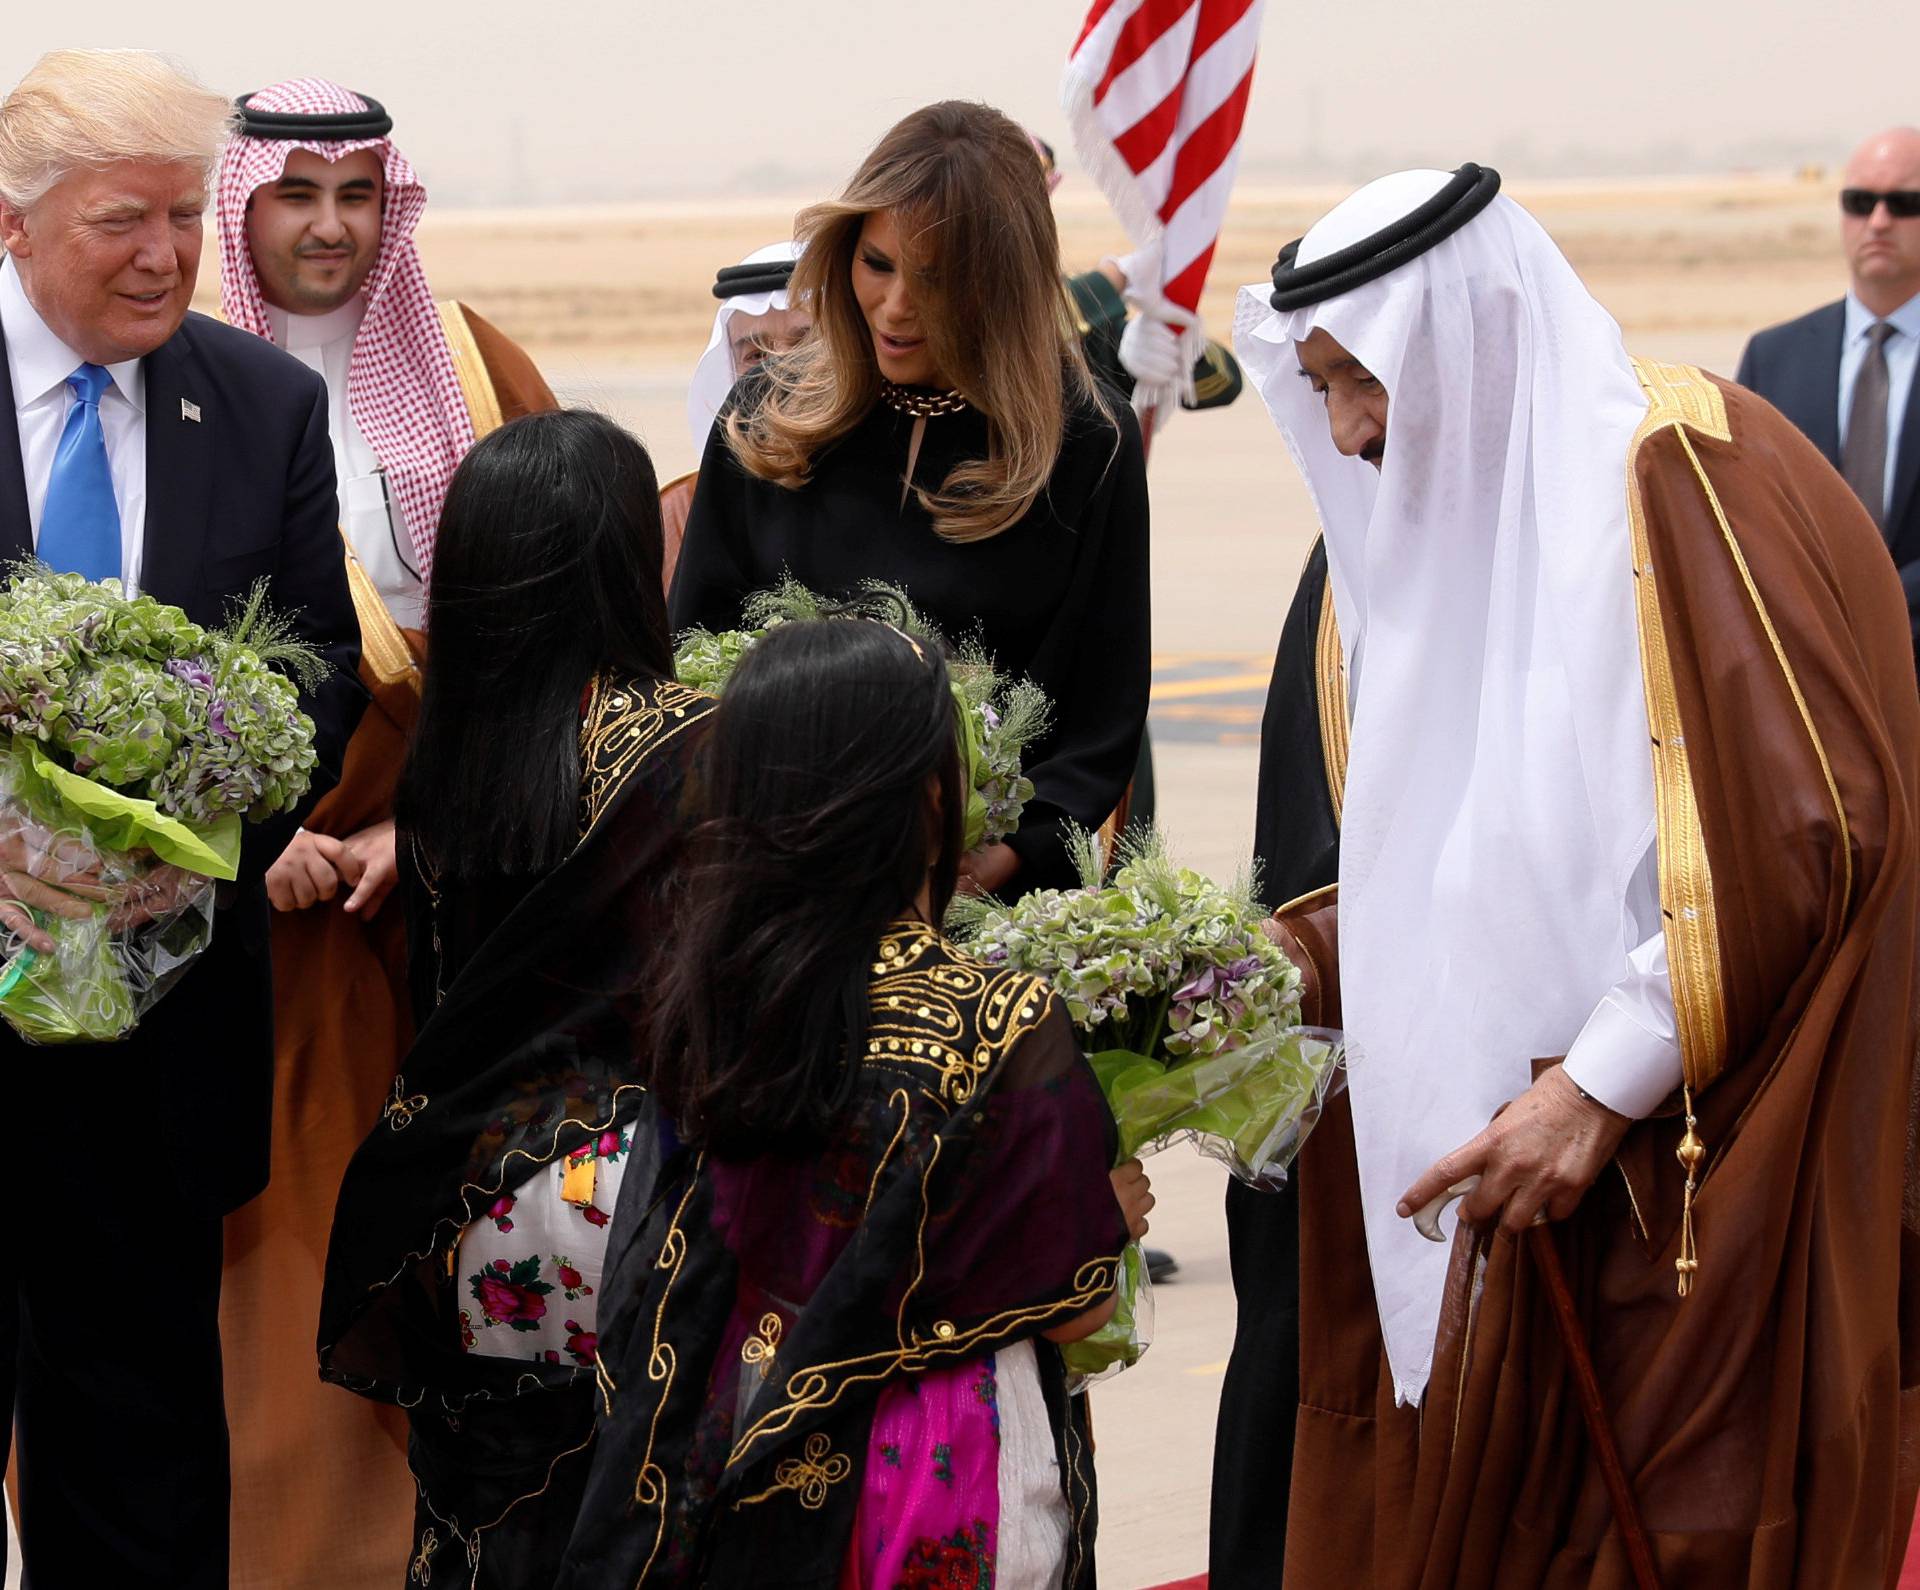 Saudi Arabia's King Salman, Trump and the first lady are greeted with flowers by children in an arrival ceremony at King Khalid Airport in Riyadh